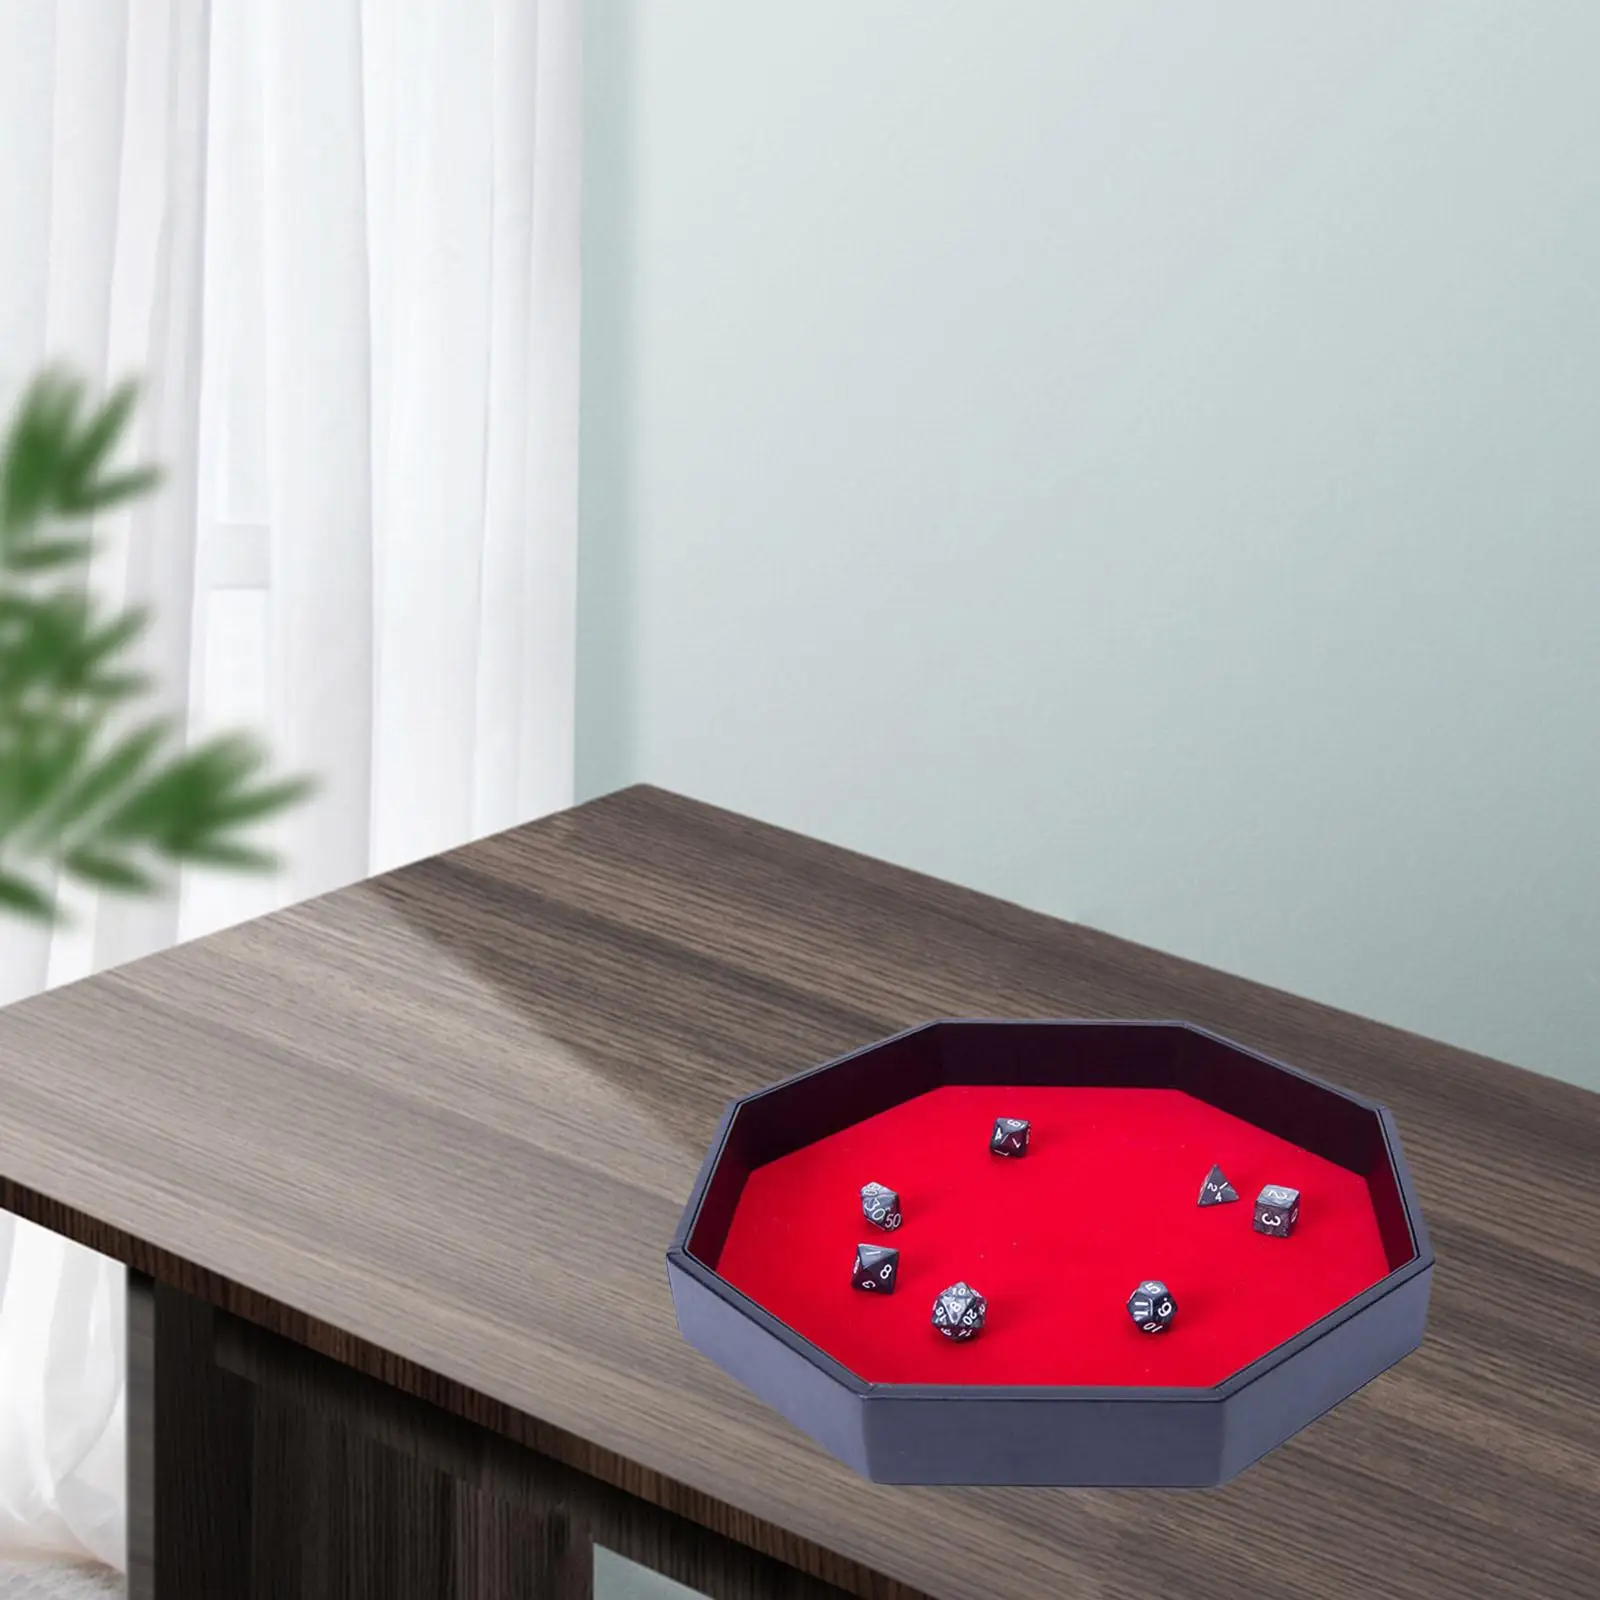 Octagonal Rolling Tray,PU Leather Holder Game Box Velvet for